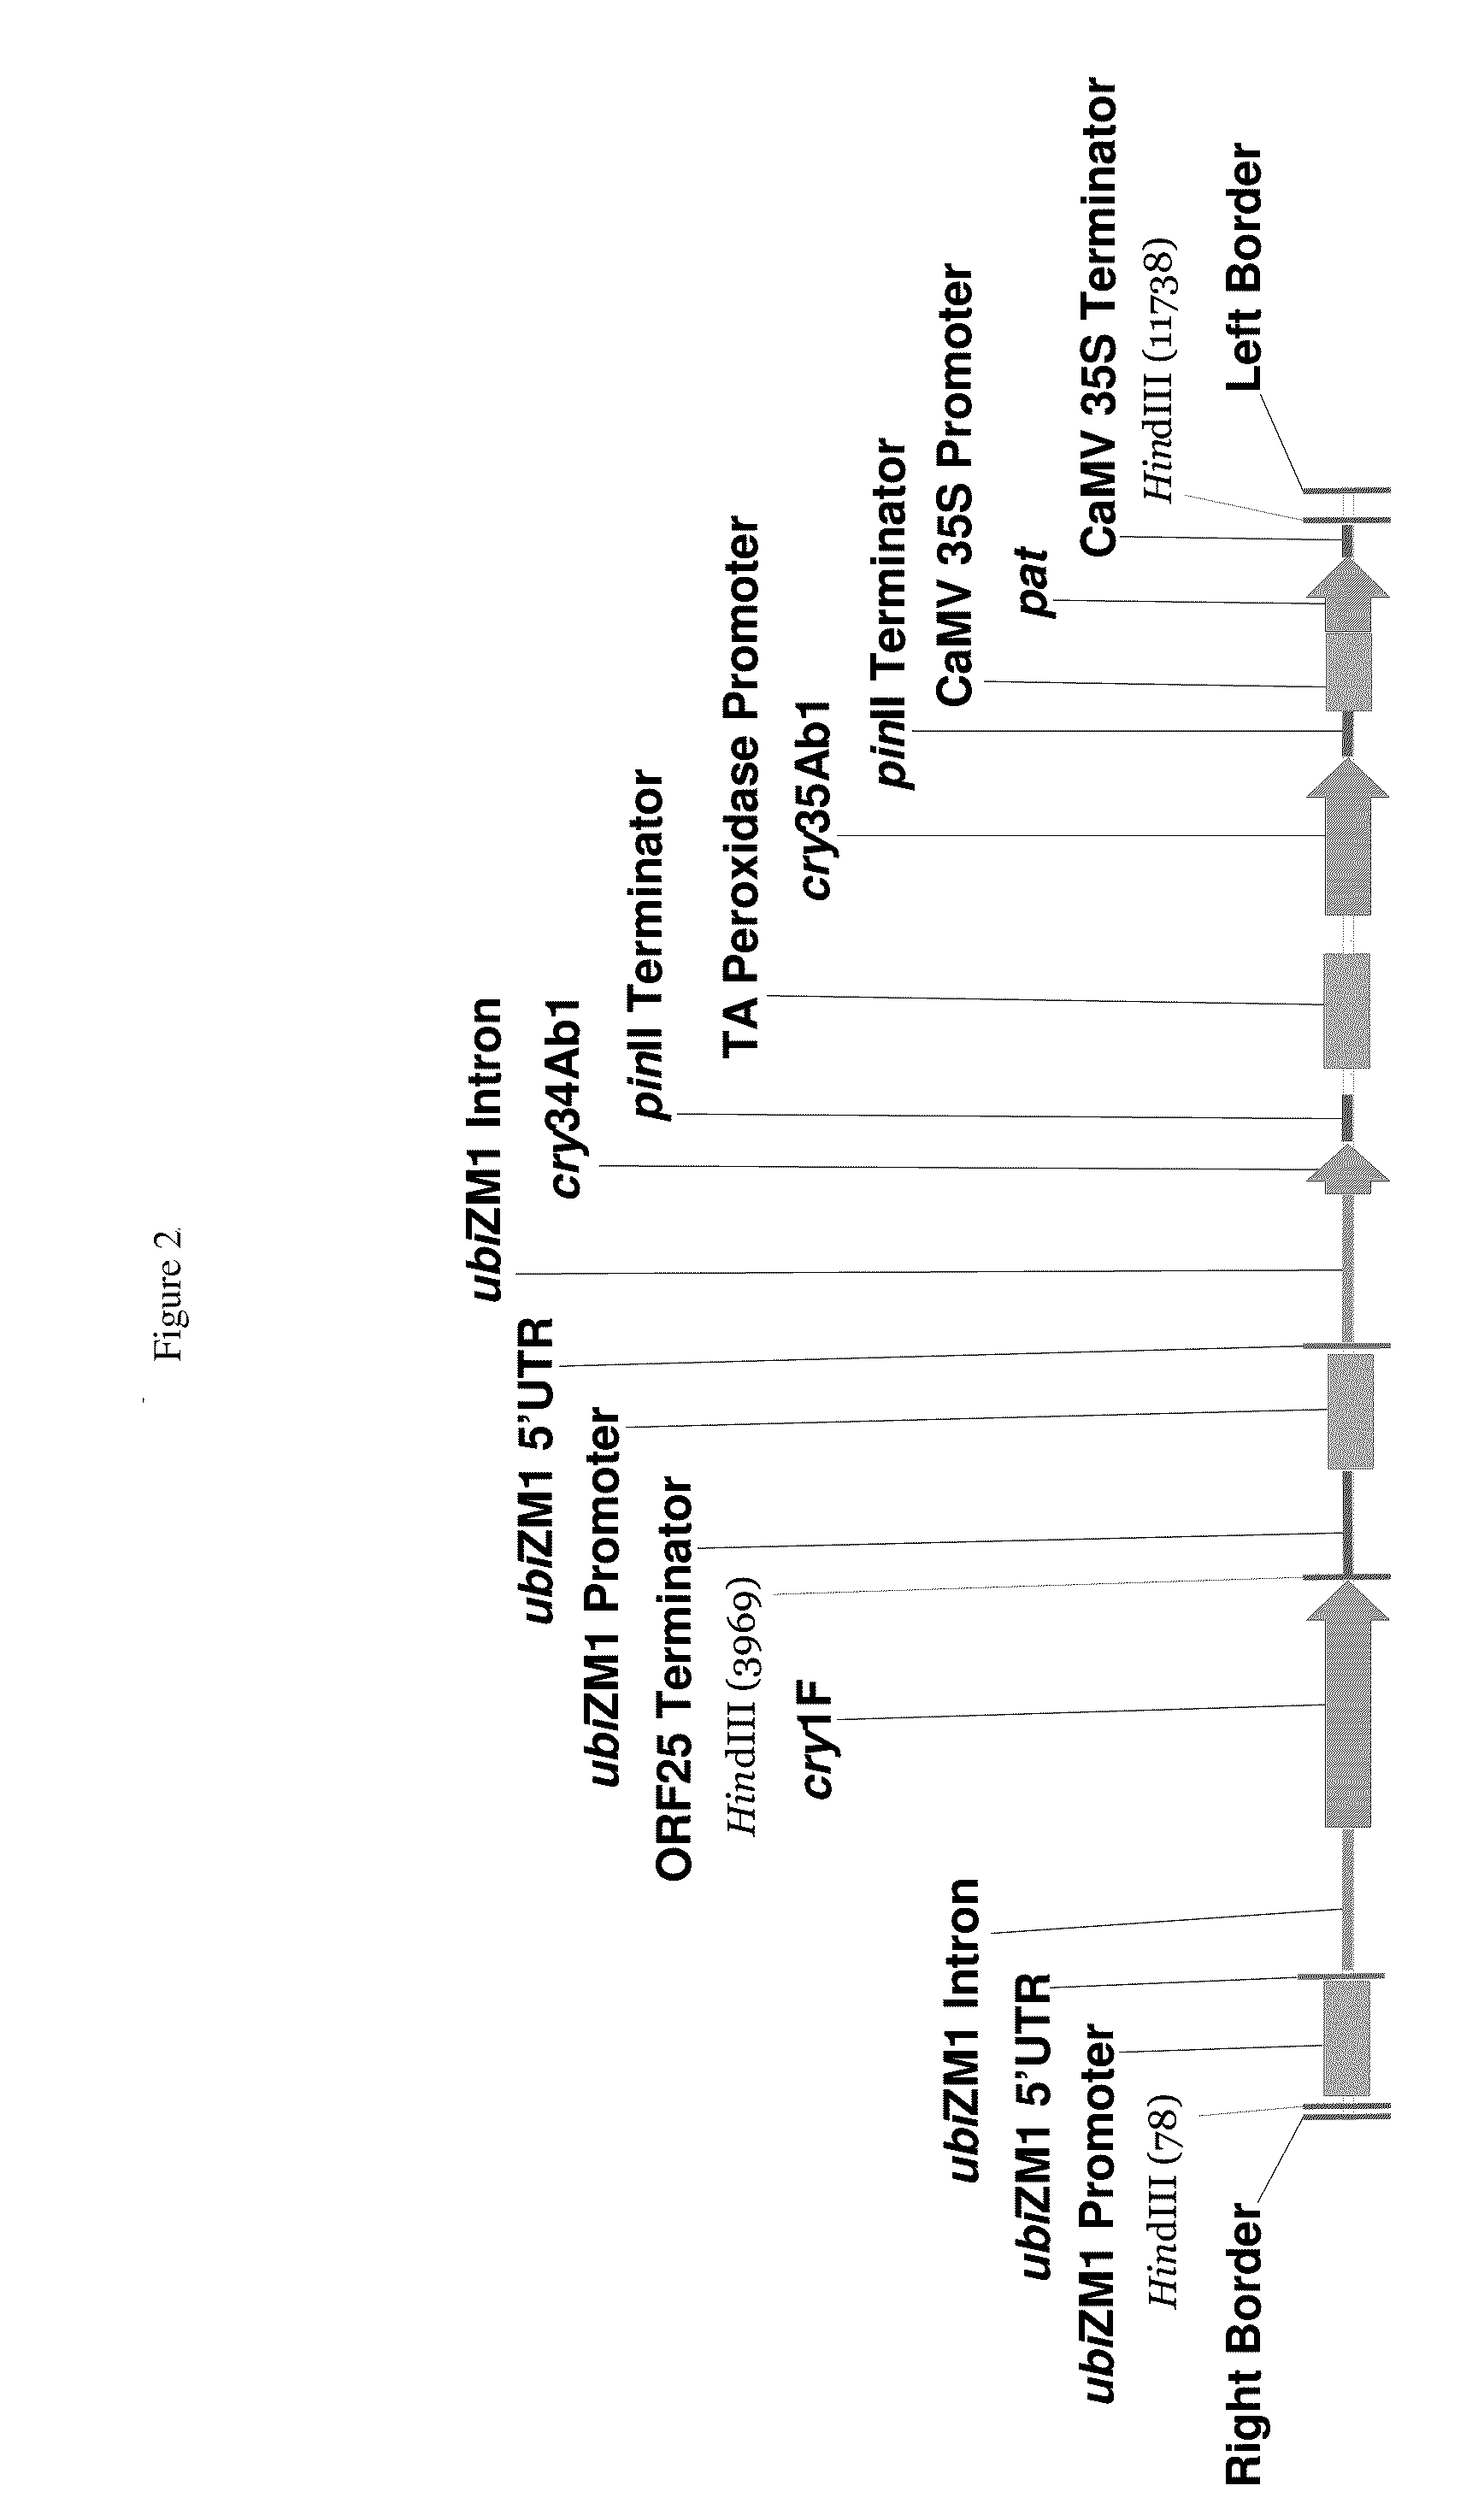 Maize event DP-004114-3 and methods for detection thereof